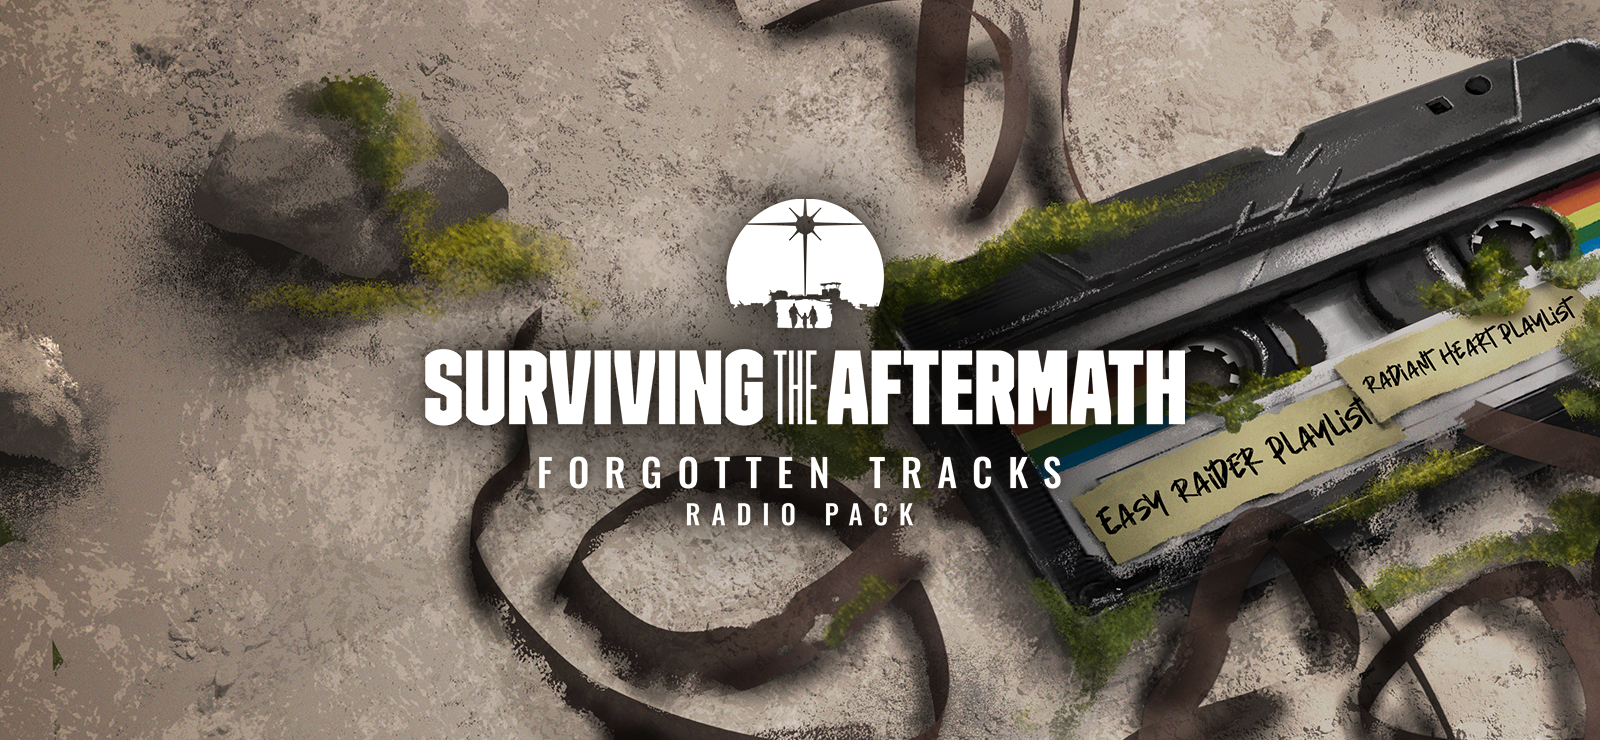 Surviving The Aftermath: Forgotten Tracks